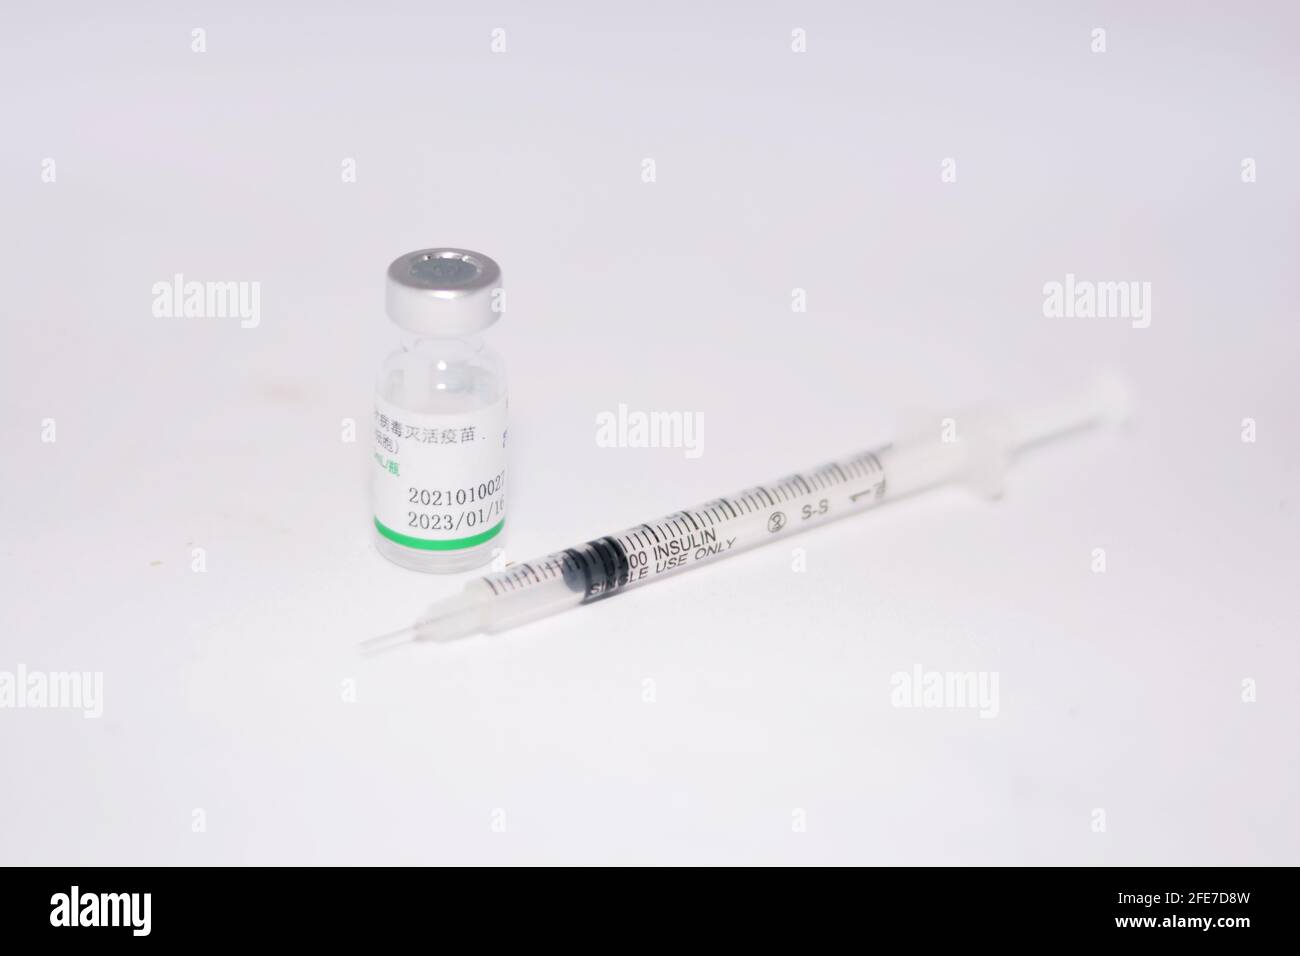 A Sinopharm COVID-19 vaccine bottle dose , Sars-Cov-2 Vaccine inactivated vero cell, Sinopharm is a Chinese state-owned company Stock Photo